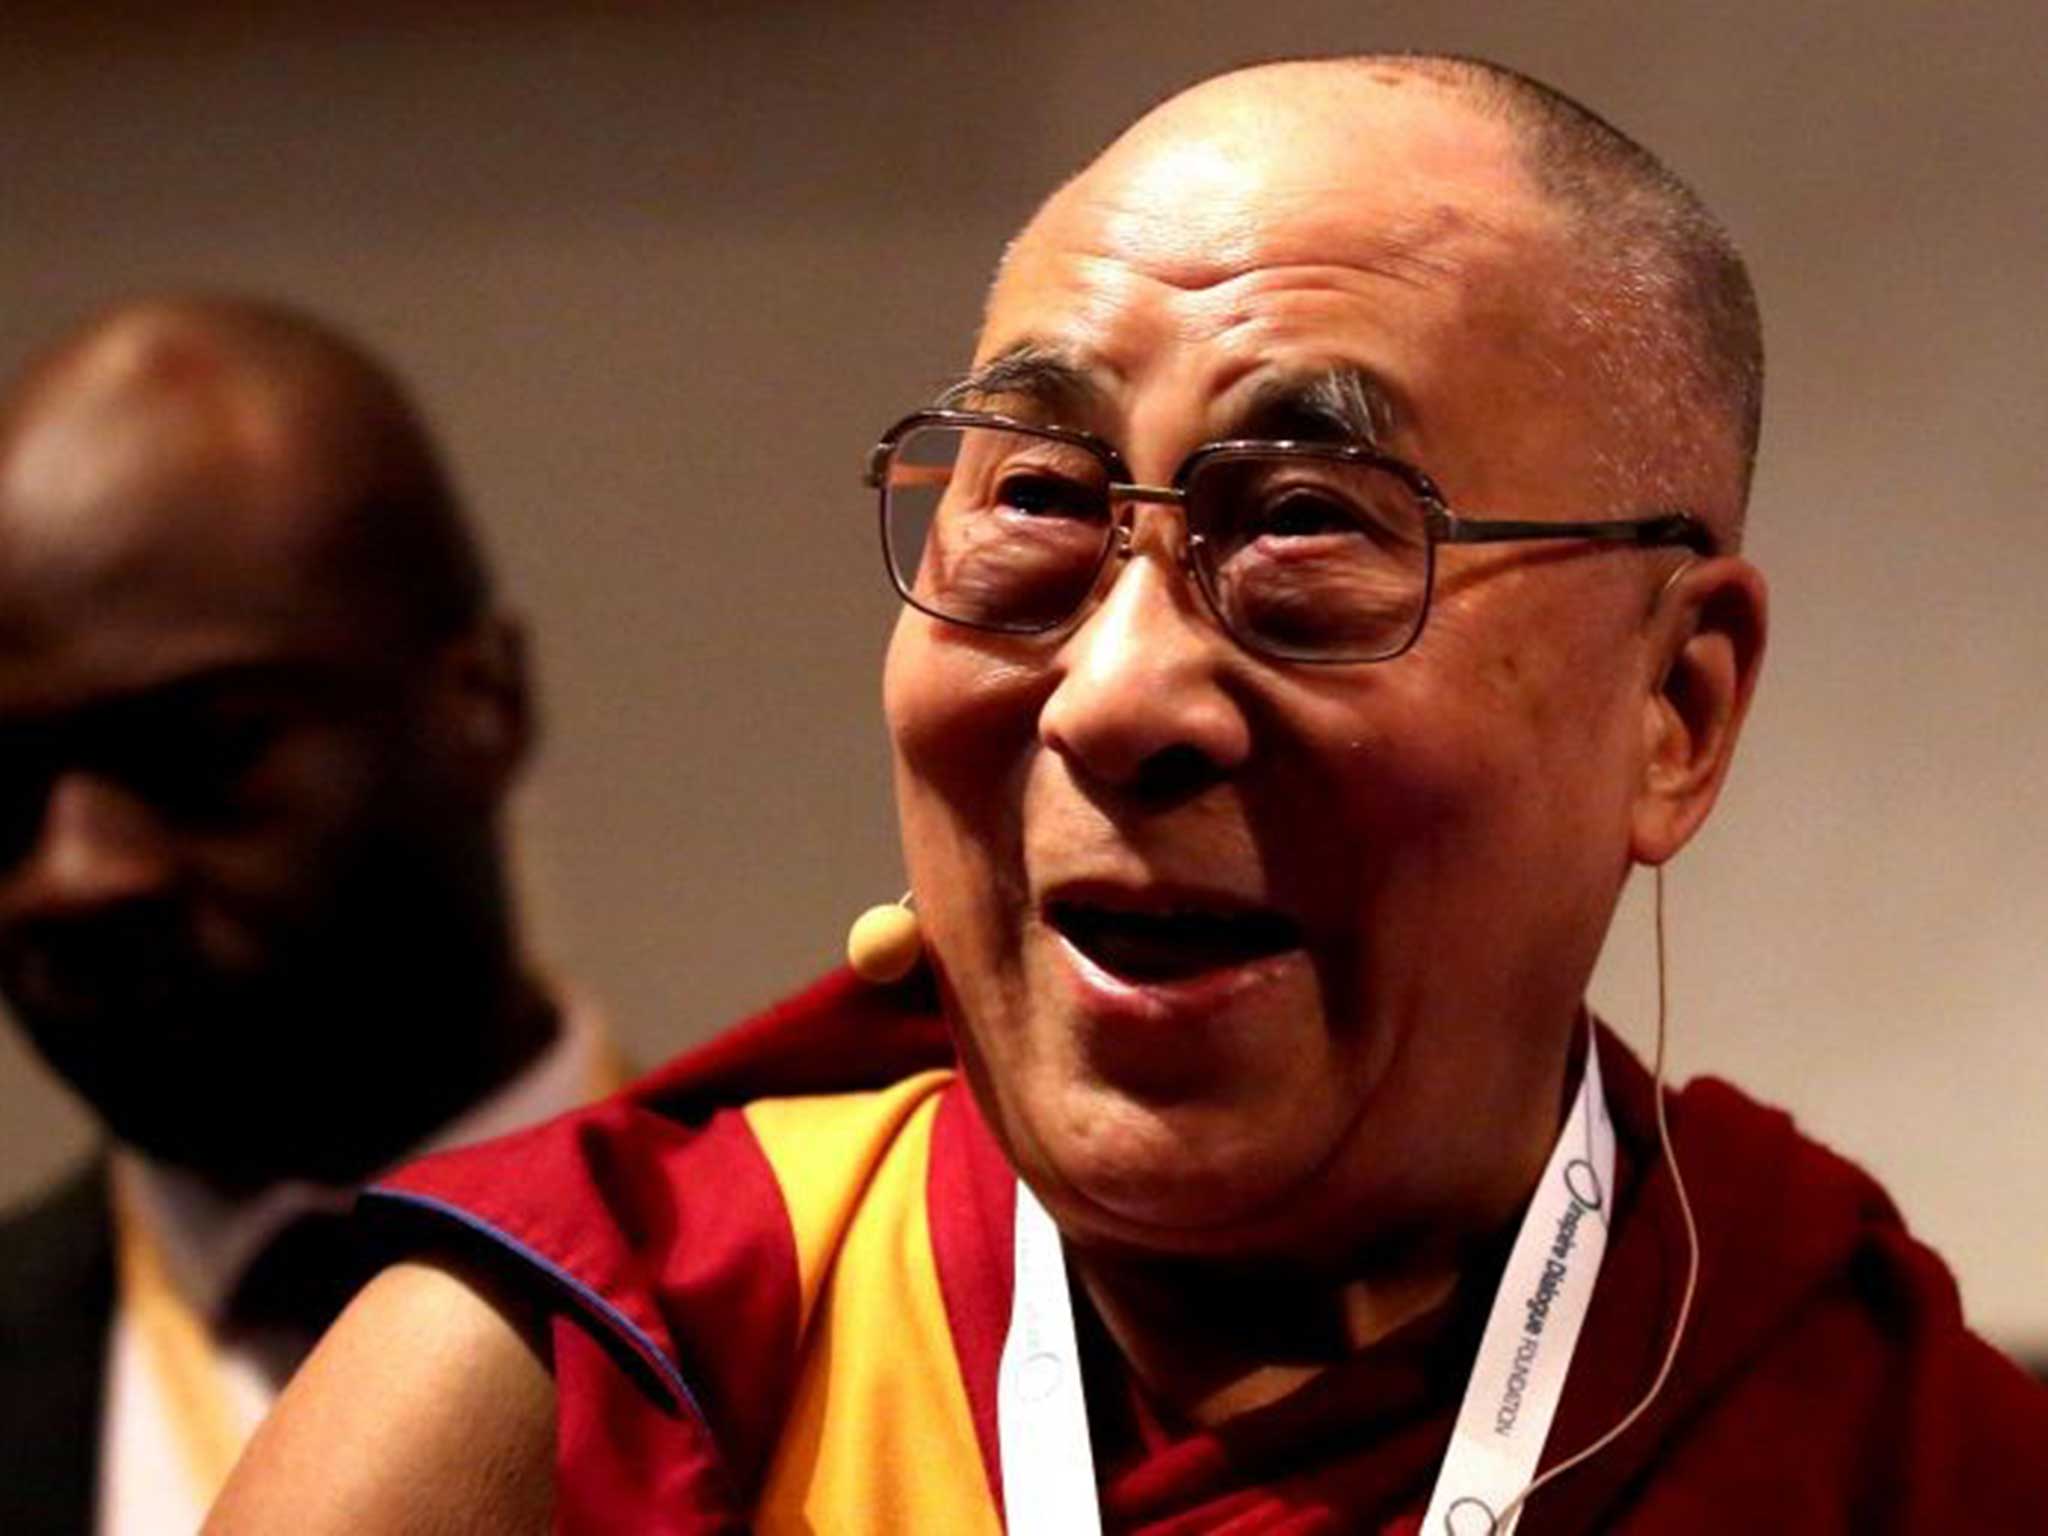 'Money, money, money. That’s what this is about. Where is morality?' the Dalai Lama said.